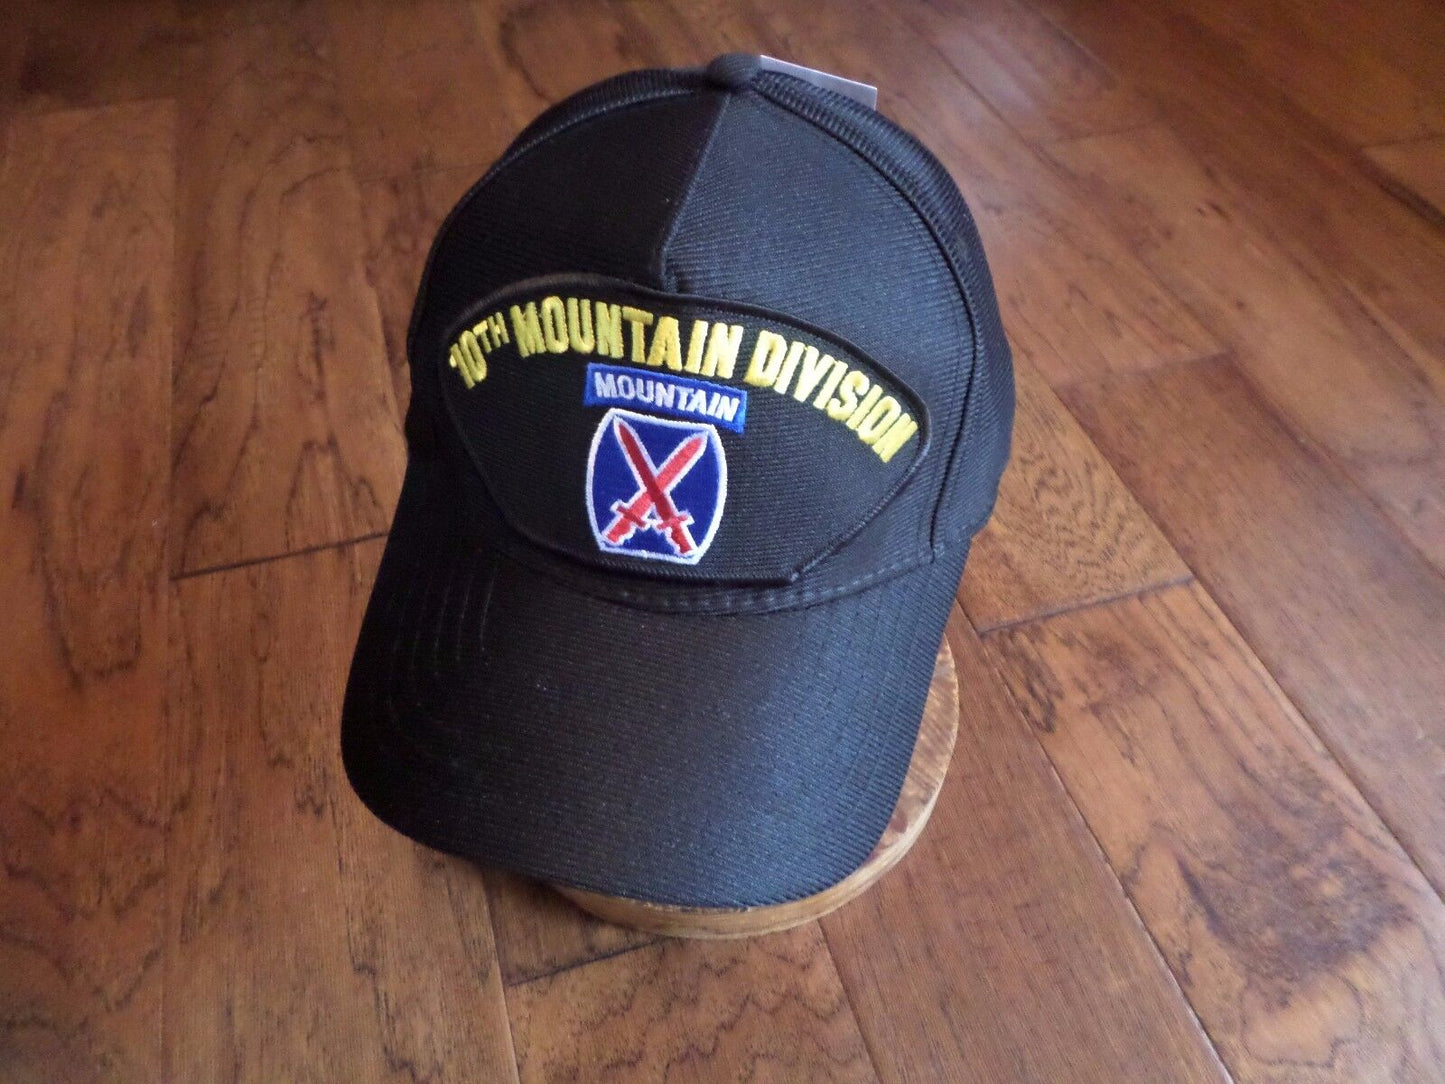 U.S ARMY 10TH MOUNTAIN DIVISION HAT OFFICIAL MILITARY BALL CAP U.S.A MADE